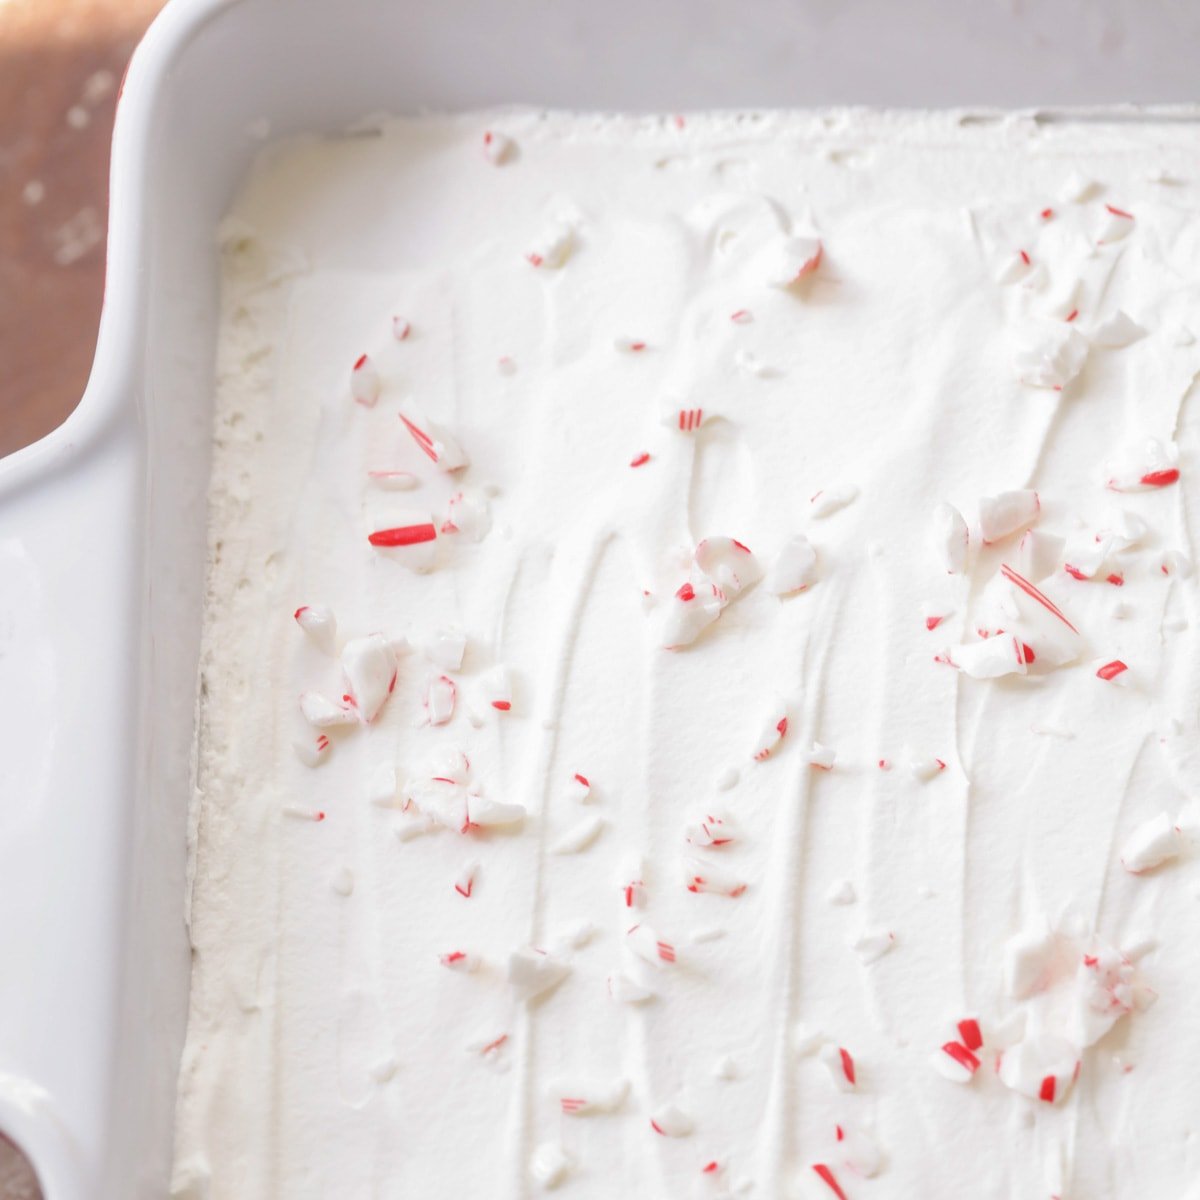 Peppermint delight topped with crushed candy canes.